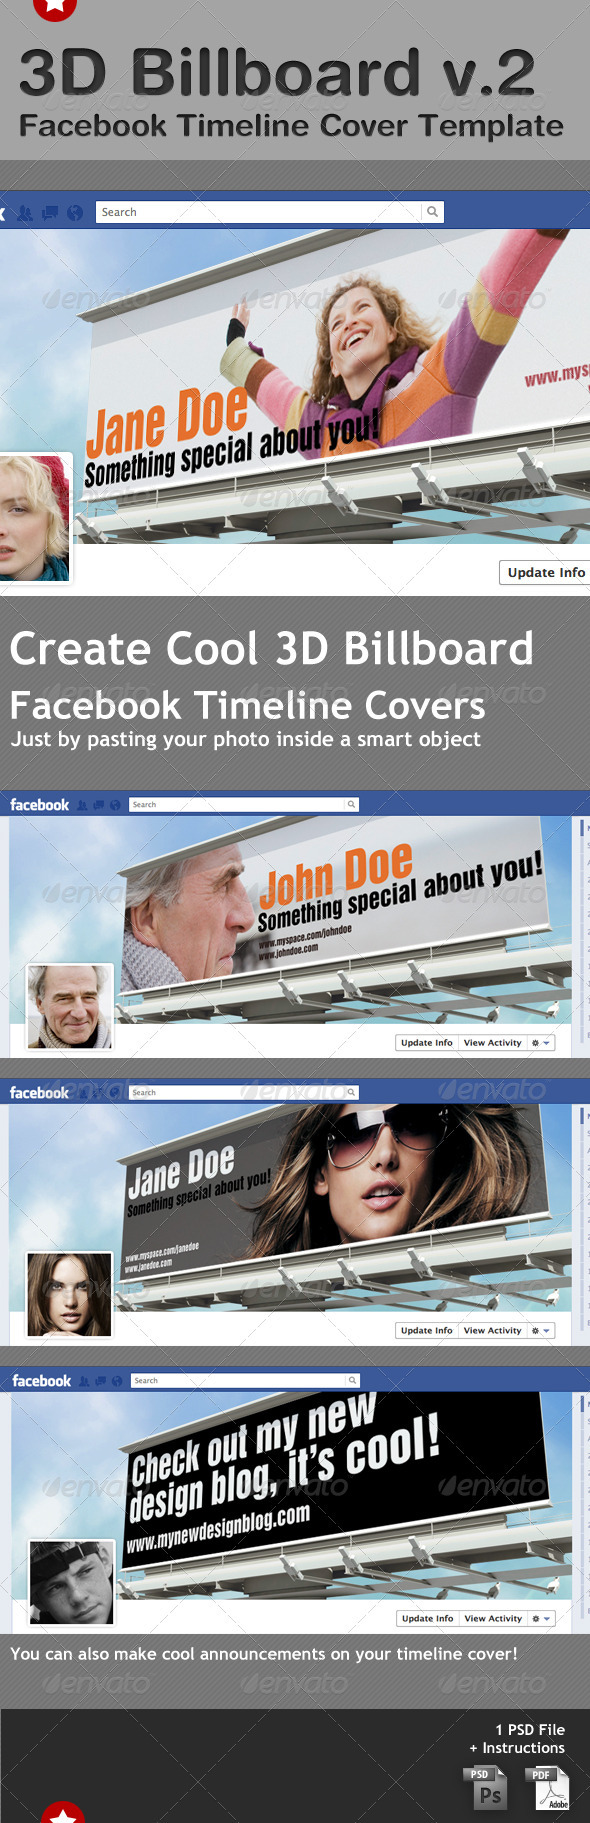 Cool Facebook Timeline Cover Templates